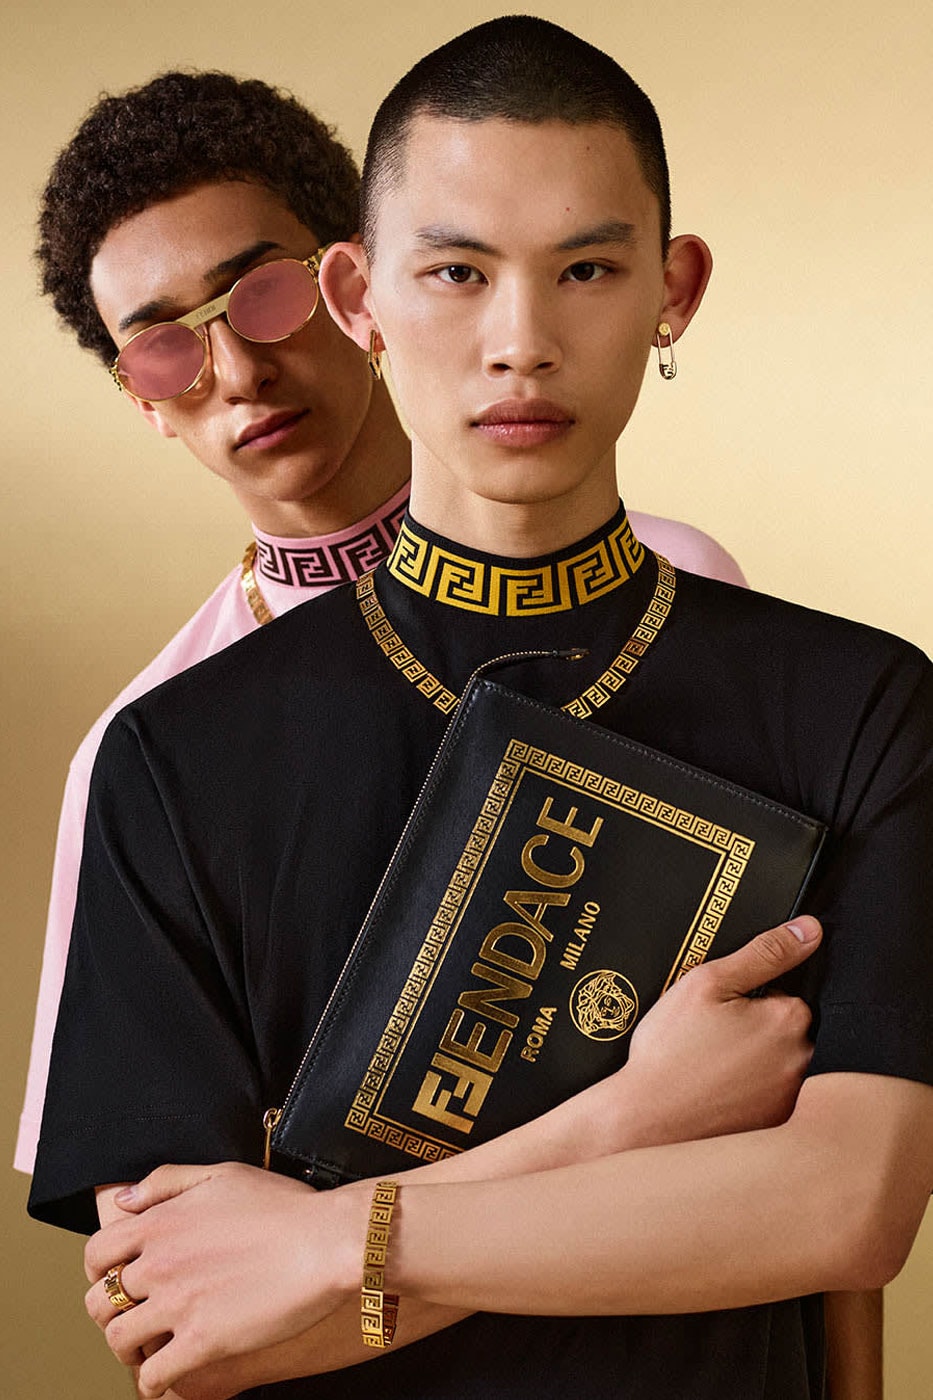 Where To Buy Fendi & Versace's Fendace Collection